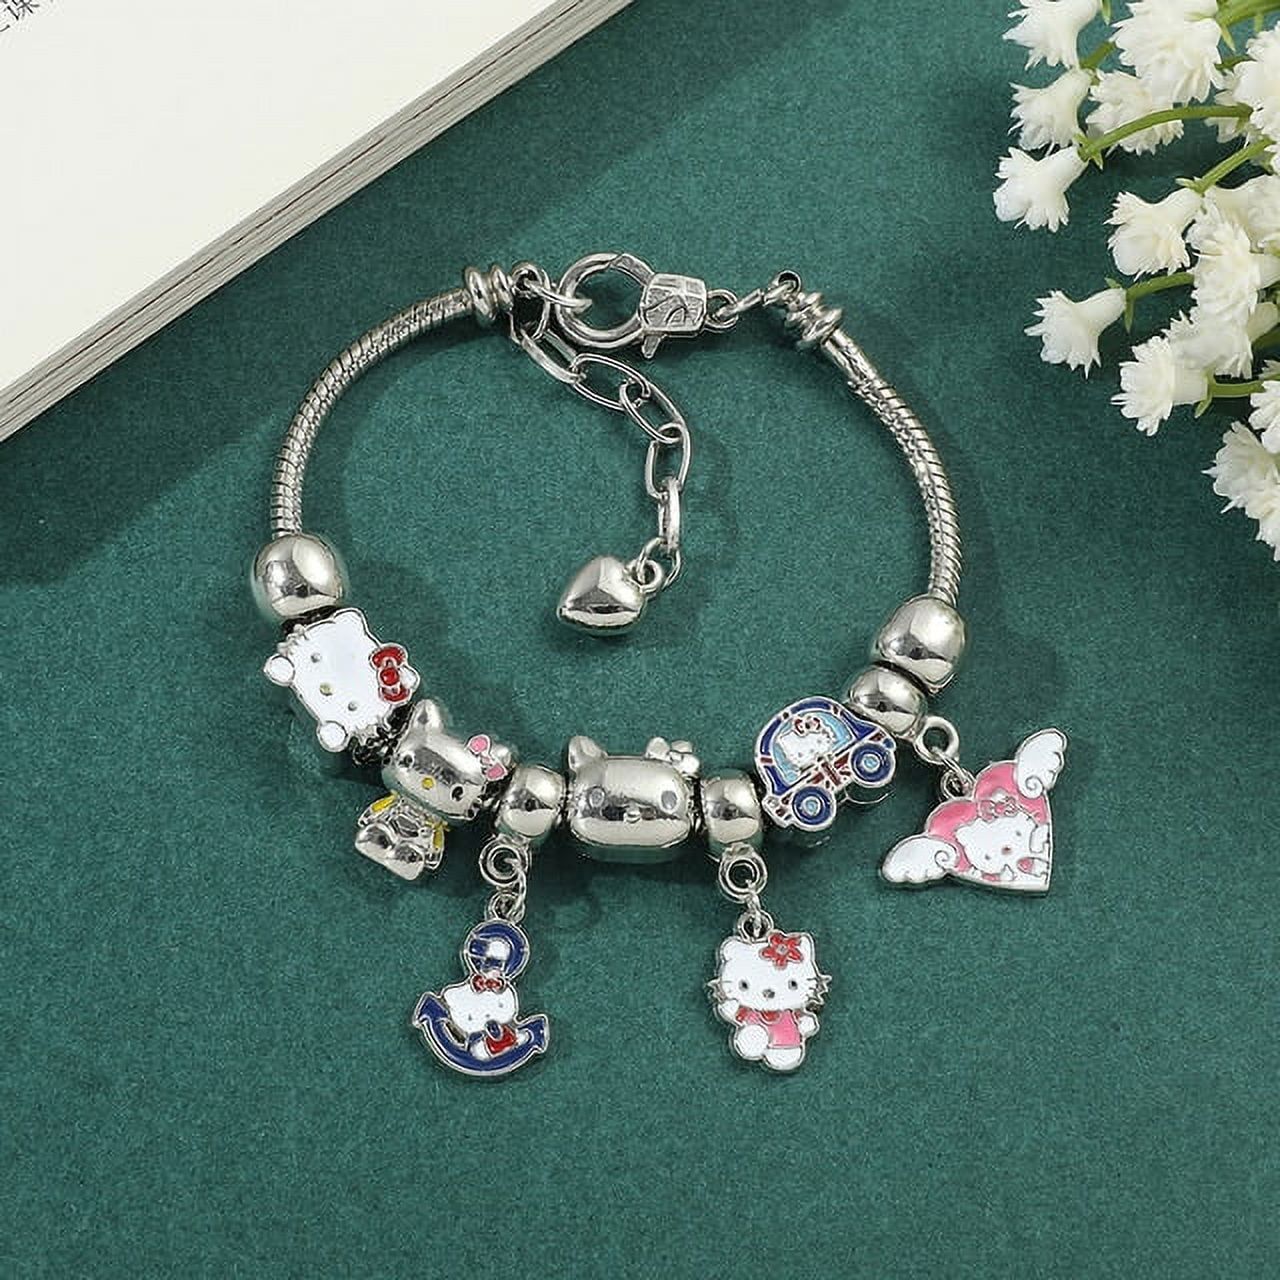 Sanrio Hello Kitty Officially Licensed Authentic Silver Plated Charm  Bracelet - 8